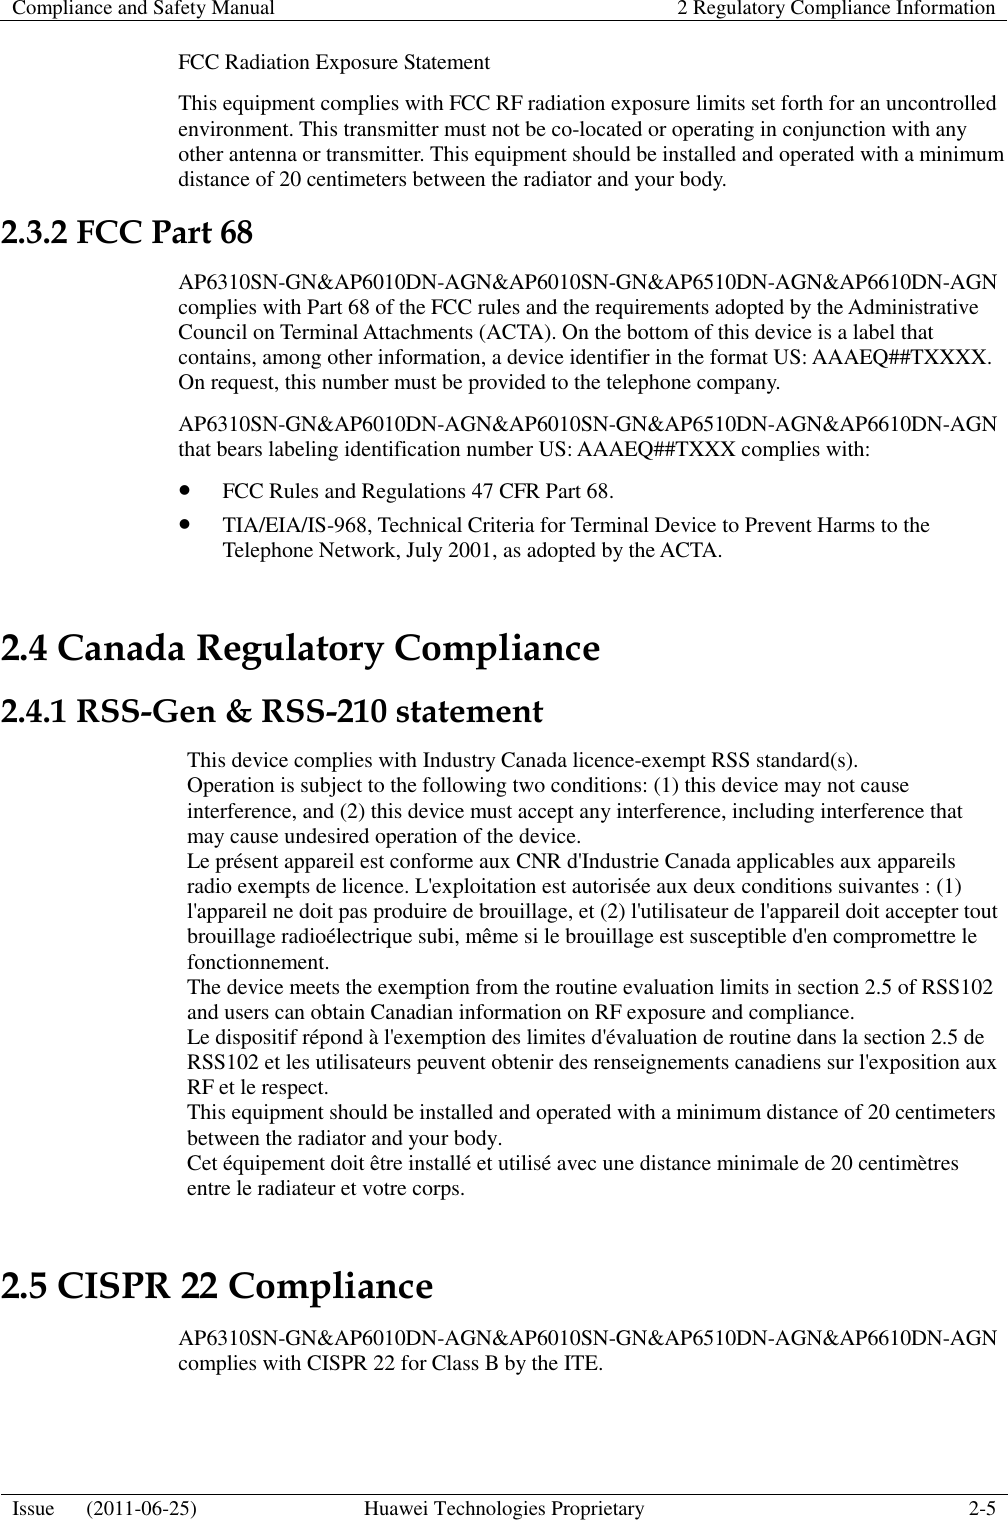 Compliance and Safety Manual 2 Regulatory Compliance Information  Issue      (2011-06-25) Huawei Technologies Proprietary 2-5  FCC Radiation Exposure Statement   This equipment complies with FCC RF radiation exposure limits set forth for an uncontrolled environment. This transmitter must not be co-located or operating in conjunction with any other antenna or transmitter. This equipment should be installed and operated with a minimum distance of 20 centimeters between the radiator and your body. 2.3.2 FCC Part 68 AP6310SN-GN&amp;AP6010DN-AGN&amp;AP6010SN-GN&amp;AP6510DN-AGN&amp;AP6610DN-AGN complies with Part 68 of the FCC rules and the requirements adopted by the Administrative Council on Terminal Attachments (ACTA). On the bottom of this device is a label that contains, among other information, a device identifier in the format US: AAAEQ##TXXXX. On request, this number must be provided to the telephone company. AP6310SN-GN&amp;AP6010DN-AGN&amp;AP6010SN-GN&amp;AP6510DN-AGN&amp;AP6610DN-AGN that bears labeling identification number US: AAAEQ##TXXX complies with:  FCC Rules and Regulations 47 CFR Part 68.  TIA/EIA/IS-968, Technical Criteria for Terminal Device to Prevent Harms to the Telephone Network, July 2001, as adopted by the ACTA. 2.4 Canada Regulatory Compliance 2.4.1 RSS-Gen &amp; RSS-210 statement This device complies with Industry Canada licence-exempt RSS standard(s). Operation is subject to the following two conditions: (1) this device may not cause interference, and (2) this device must accept any interference, including interference that may cause undesired operation of the device. Le présent appareil est conforme aux CNR d&apos;Industrie Canada applicables aux appareils radio exempts de licence. L&apos;exploitation est autorisée aux deux conditions suivantes : (1) l&apos;appareil ne doit pas produire de brouillage, et (2) l&apos;utilisateur de l&apos;appareil doit accepter tout brouillage radioélectrique subi, même si le brouillage est susceptible d&apos;en compromettre le fonctionnement.   The device meets the exemption from the routine evaluation limits in section 2.5 of RSS102 and users can obtain Canadian information on RF exposure and compliance.   Le dispositif répond à l&apos;exemption des limites d&apos;évaluation de routine dans la section 2.5 de RSS102 et les utilisateurs peuvent obtenir des renseignements canadiens sur l&apos;exposition aux RF et le respect.   This equipment should be installed and operated with a minimum distance of 20 centimeters between the radiator and your body.   Cet équipement doit être installé et utilisé avec une distance minimale de 20 centimètres entre le radiateur et votre corps. 2.5 CISPR 22 Compliance AP6310SN-GN&amp;AP6010DN-AGN&amp;AP6010SN-GN&amp;AP6510DN-AGN&amp;AP6610DN-AGN complies with CISPR 22 for Class B by the ITE. 